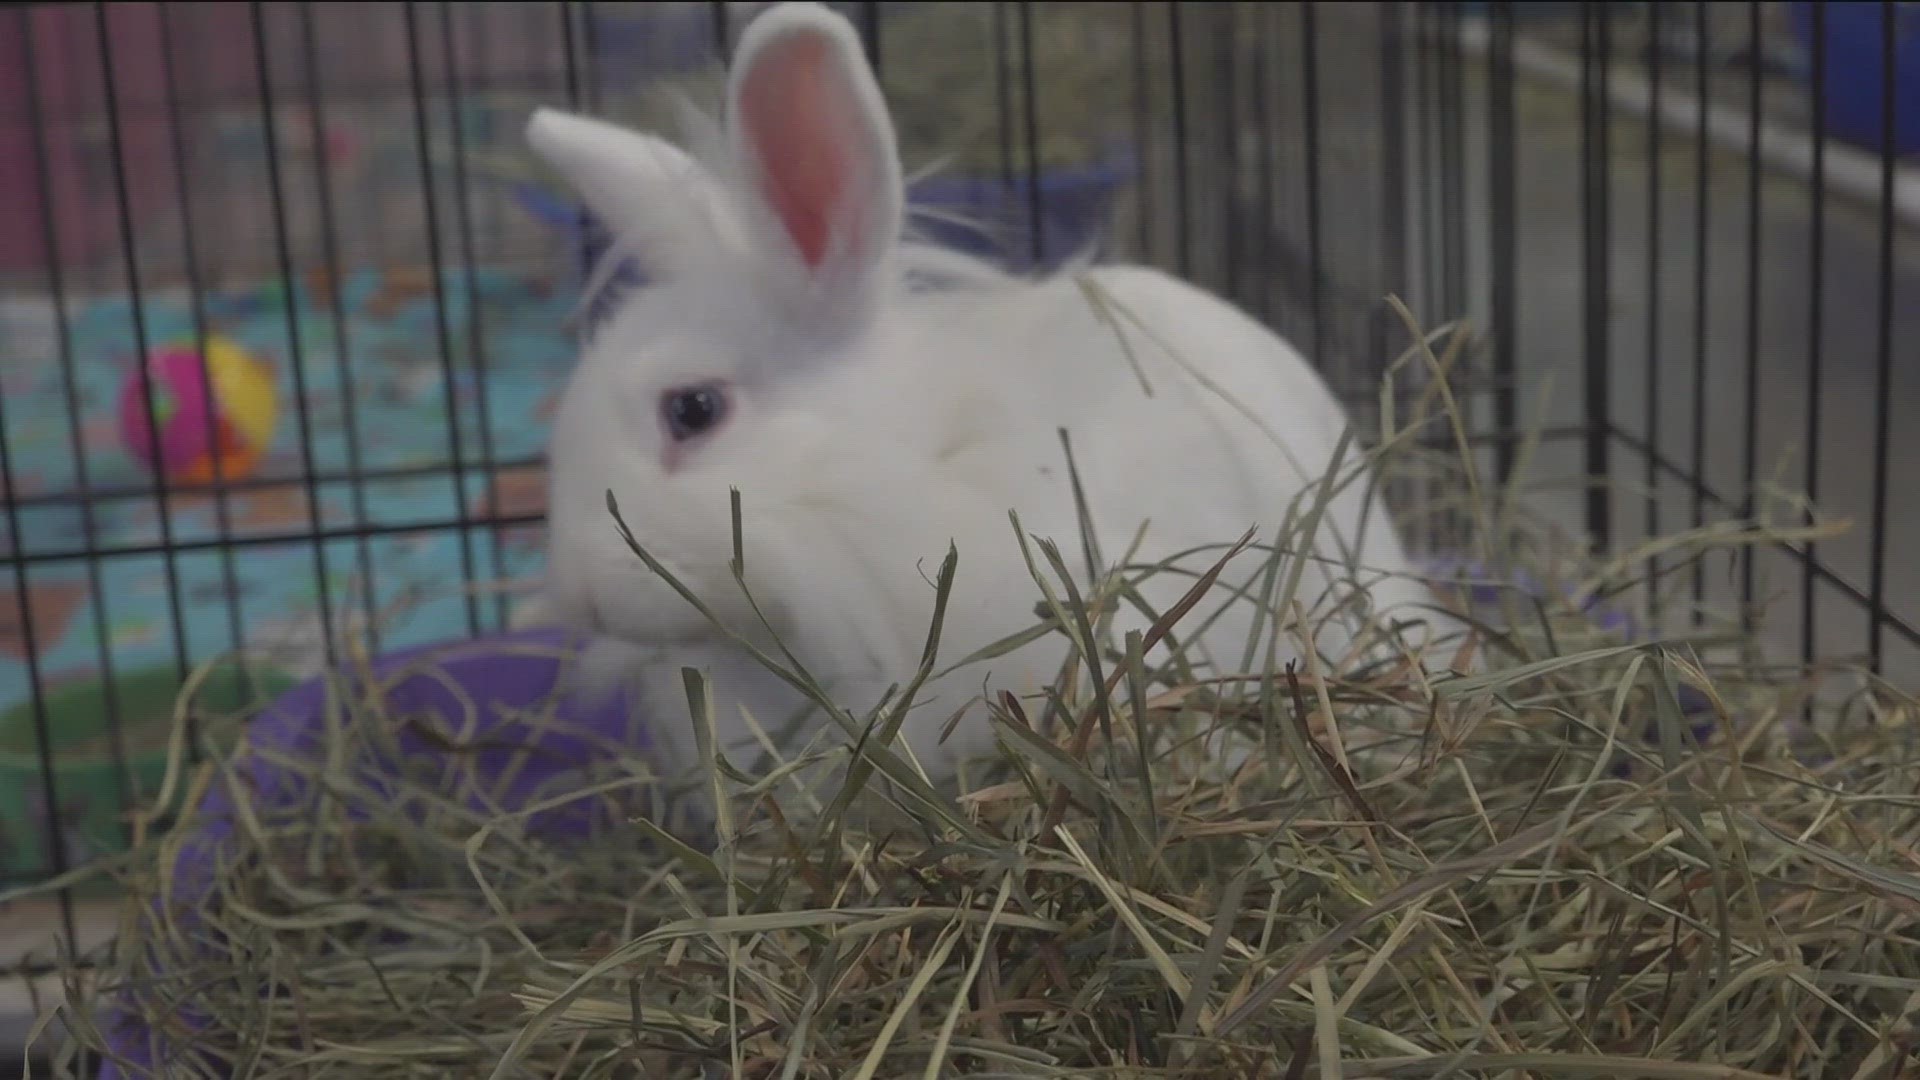 The Rancho Coastal Humane Society in Encinitas says shelters nationwide come across stray bunnies who were abandoned by families that adopted them for Easter.